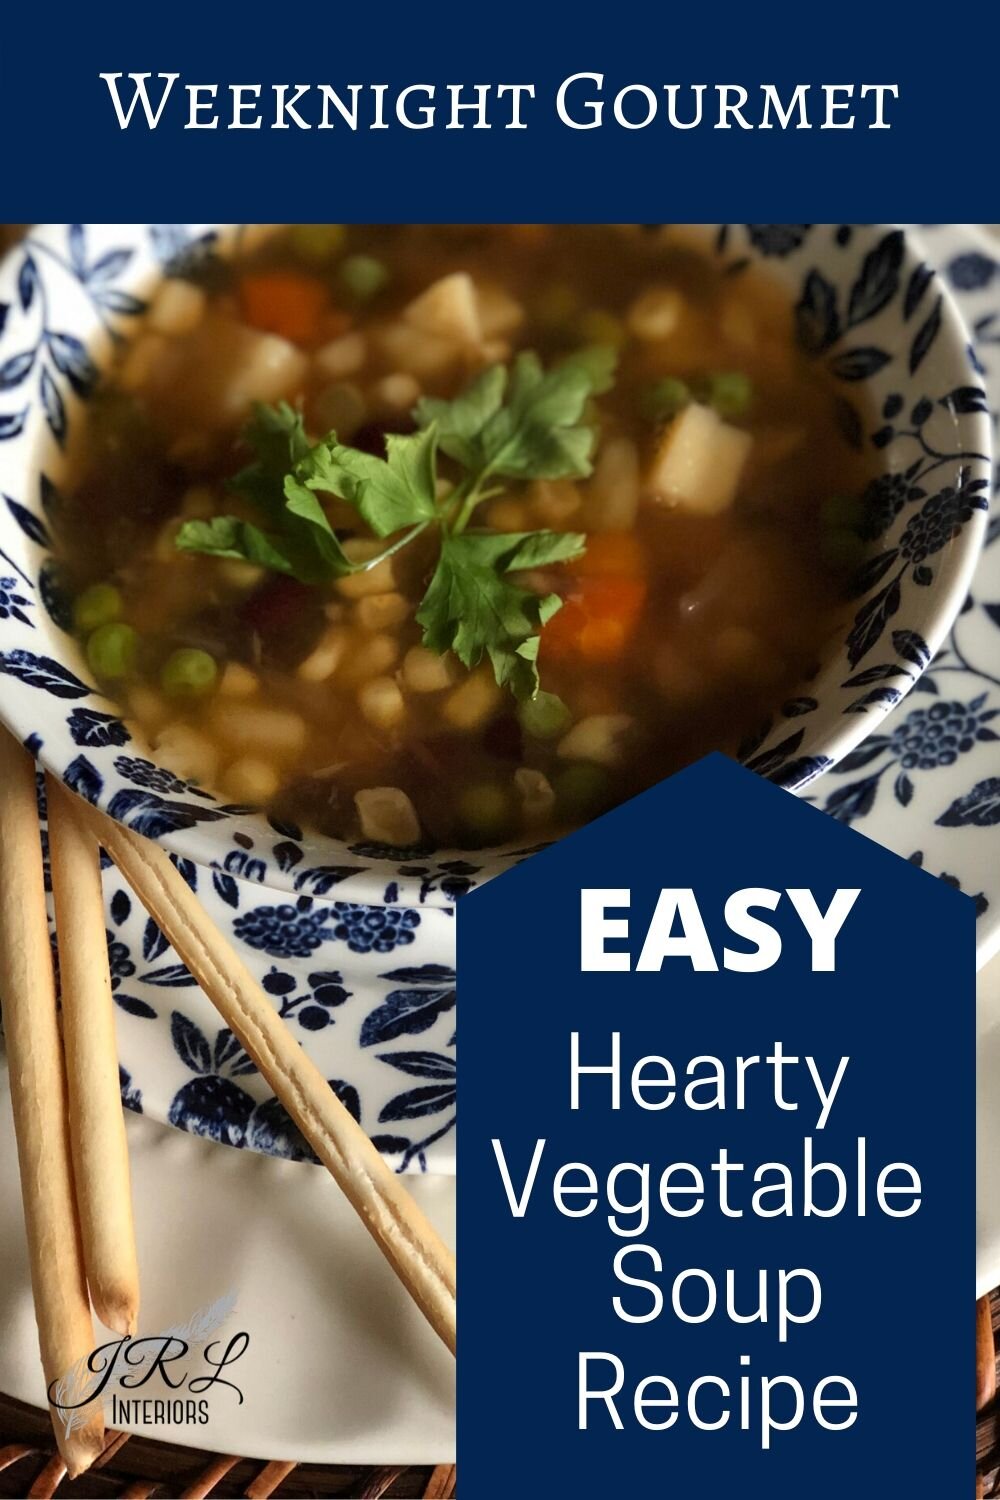 JRL Interiors — Hearty Vegetable Soup Recipe